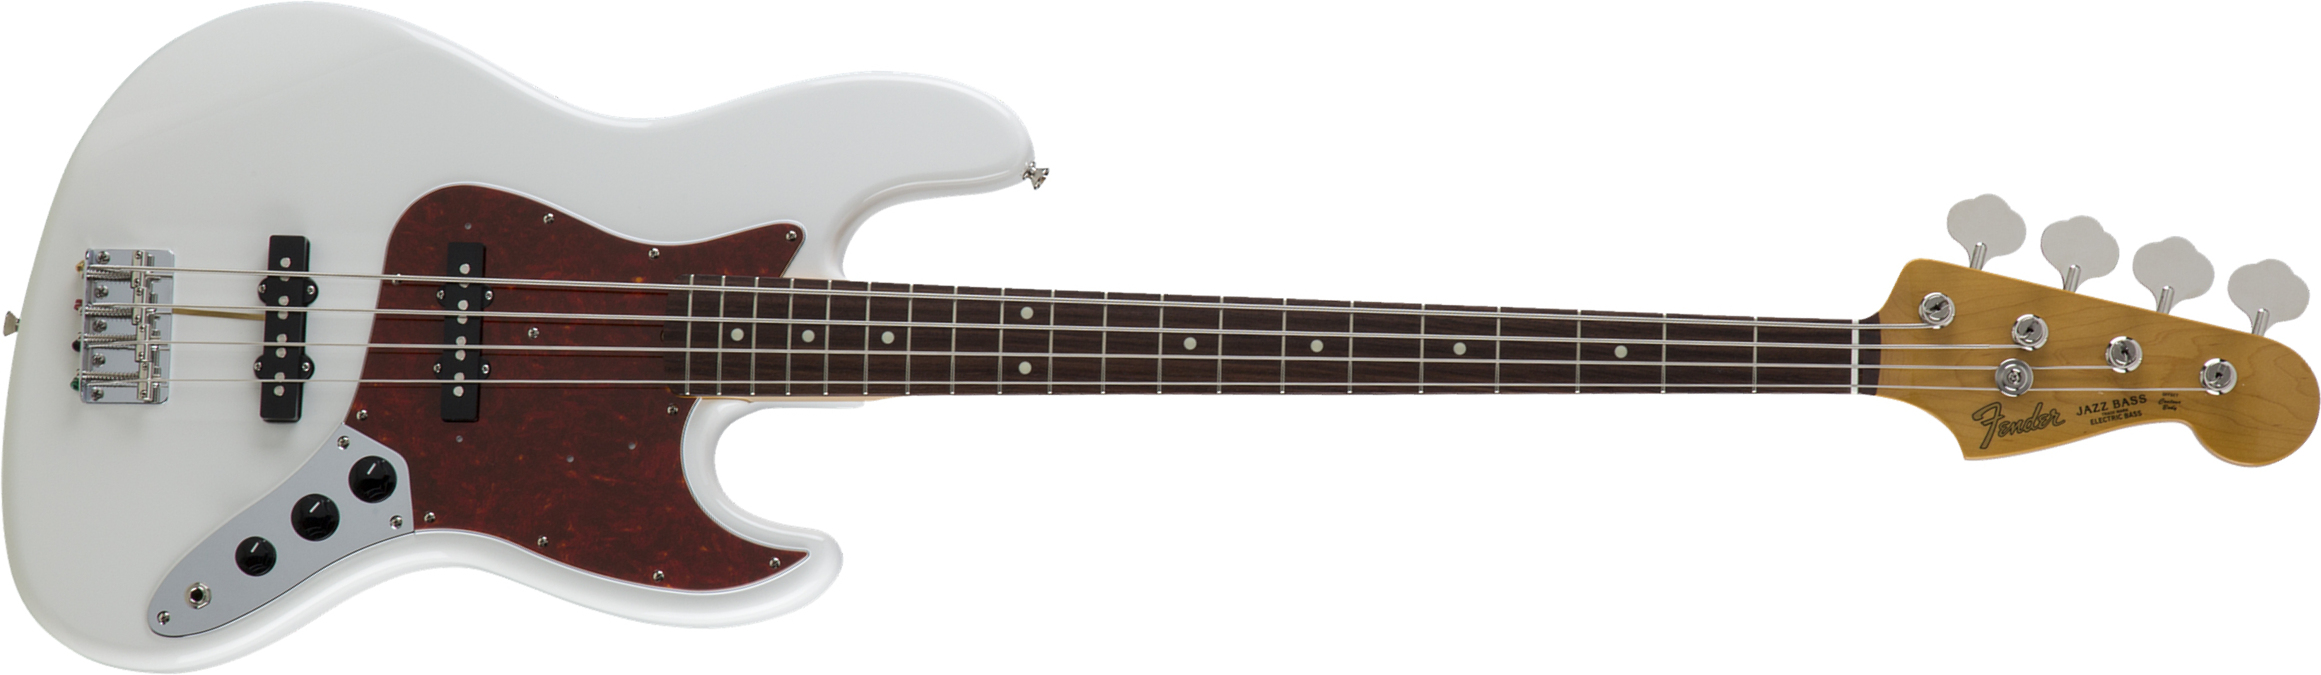 Fender Jazz Bass Traditional Ii 60s Jap 2s Trem Rw - Olympic White - Basse Électrique Solid Body - Main picture